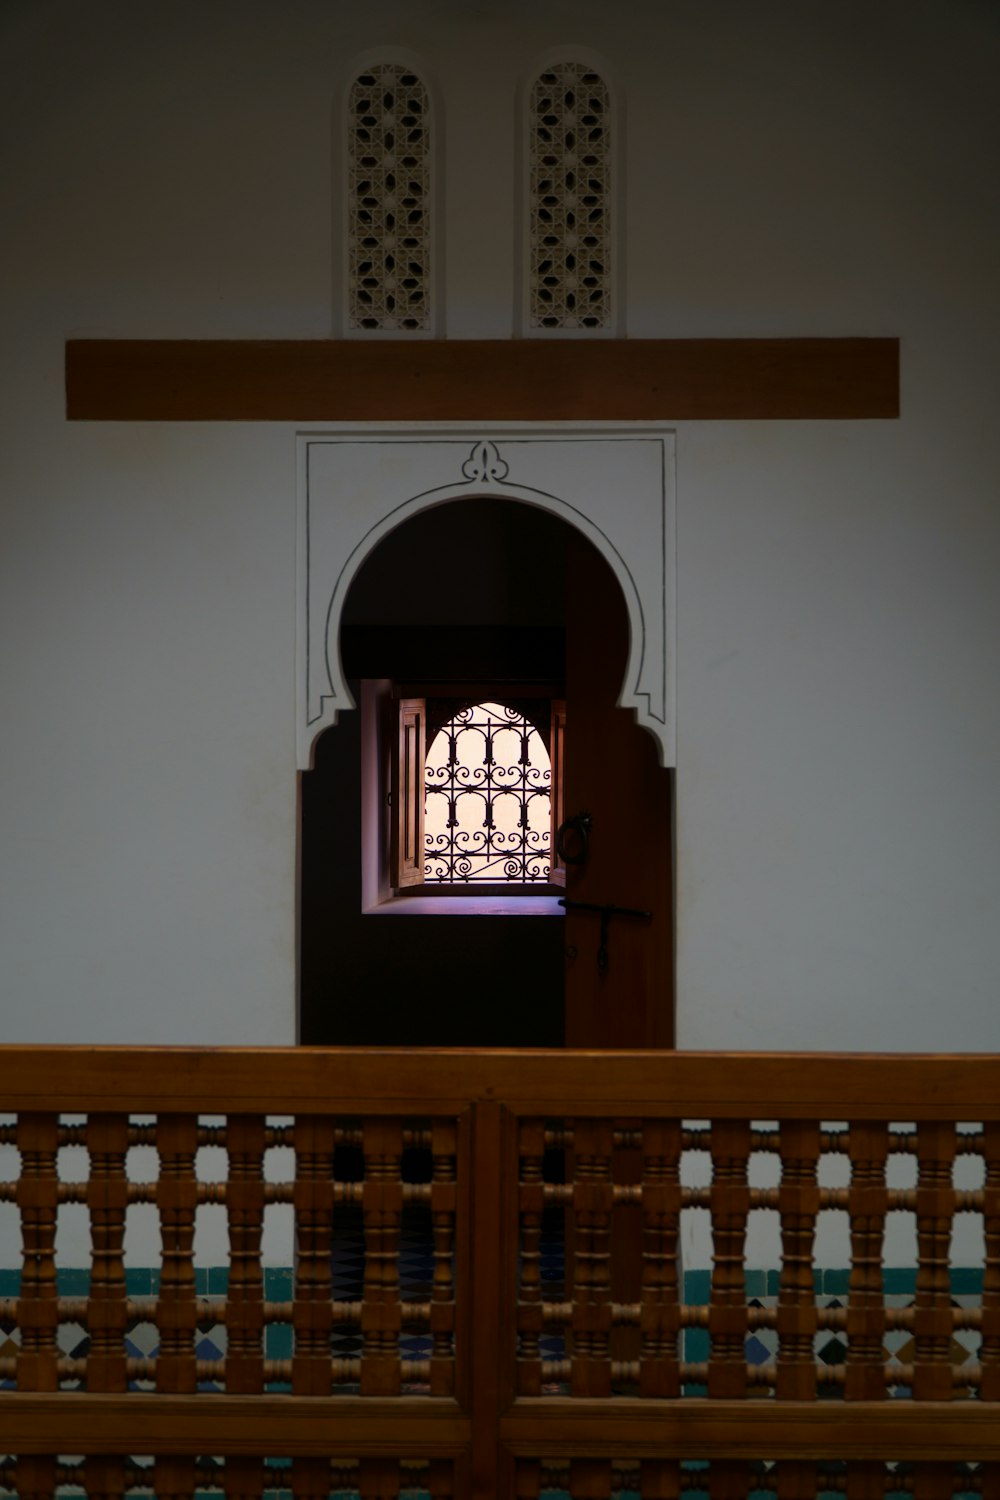 a view of a window from inside a building